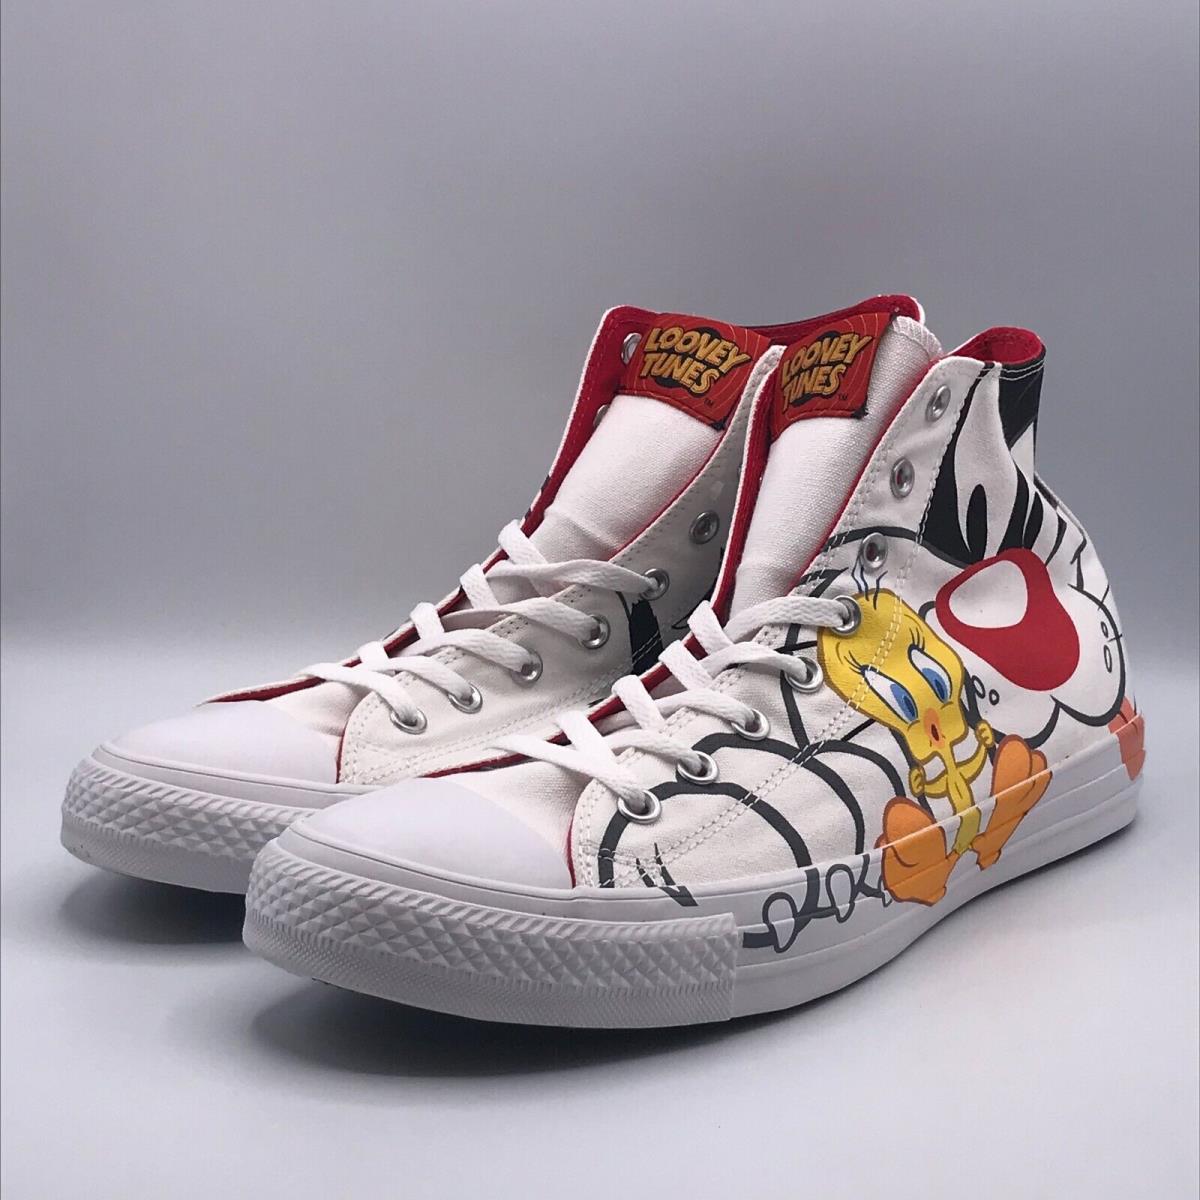 Converse Shoes Mens Size 13 Looney Tunes Ctas Hi Sylvester Tweety White Sneakers